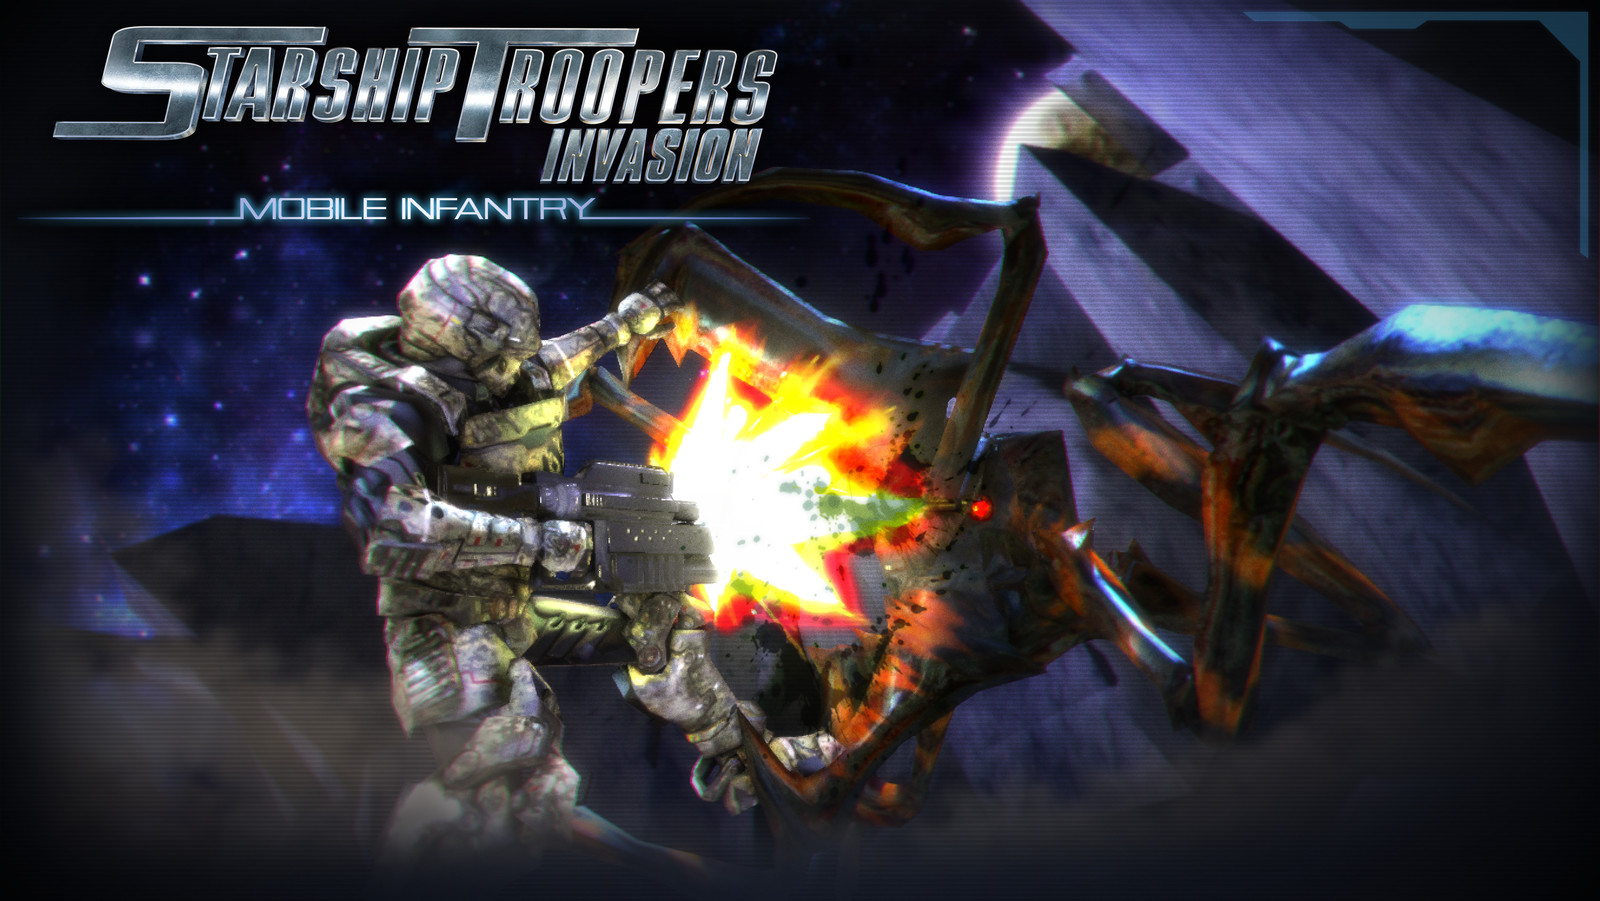 Share 149+ anime starship troopers best - awesomeenglish.edu.vn